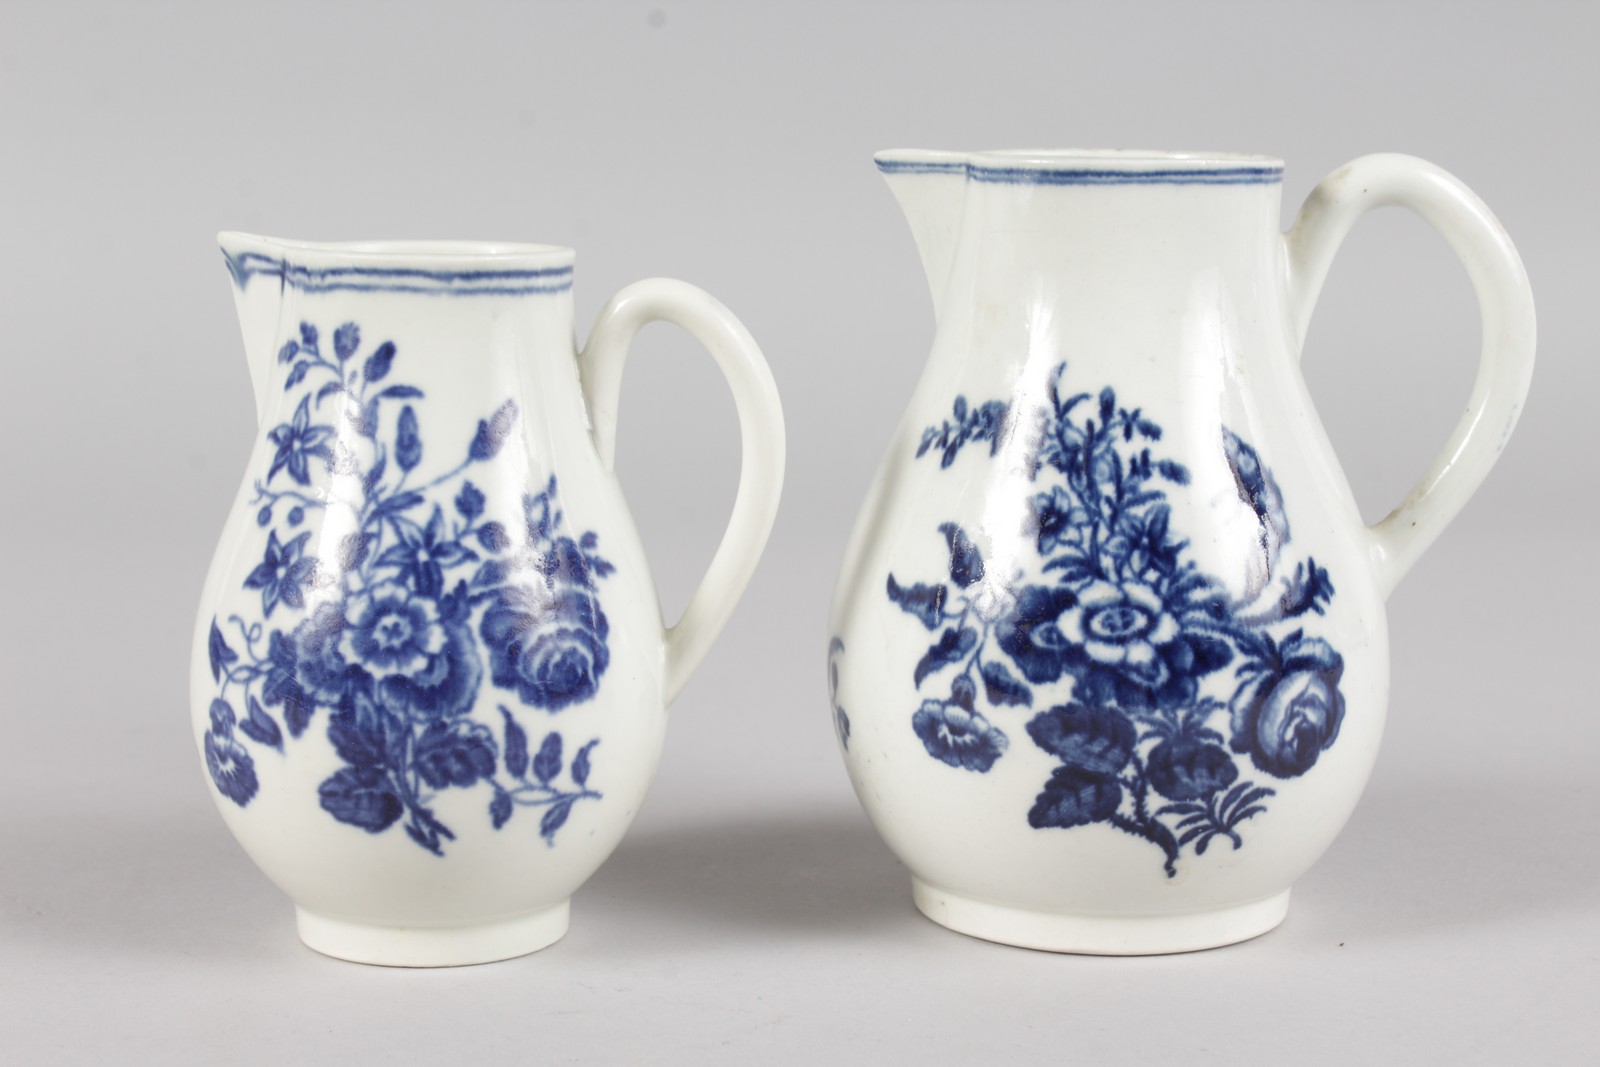 AN 18TH CENTURY WORCESTER SPARROW BEAK JUG, printed with the Three Flowers pattern in underglaze - Image 3 of 3